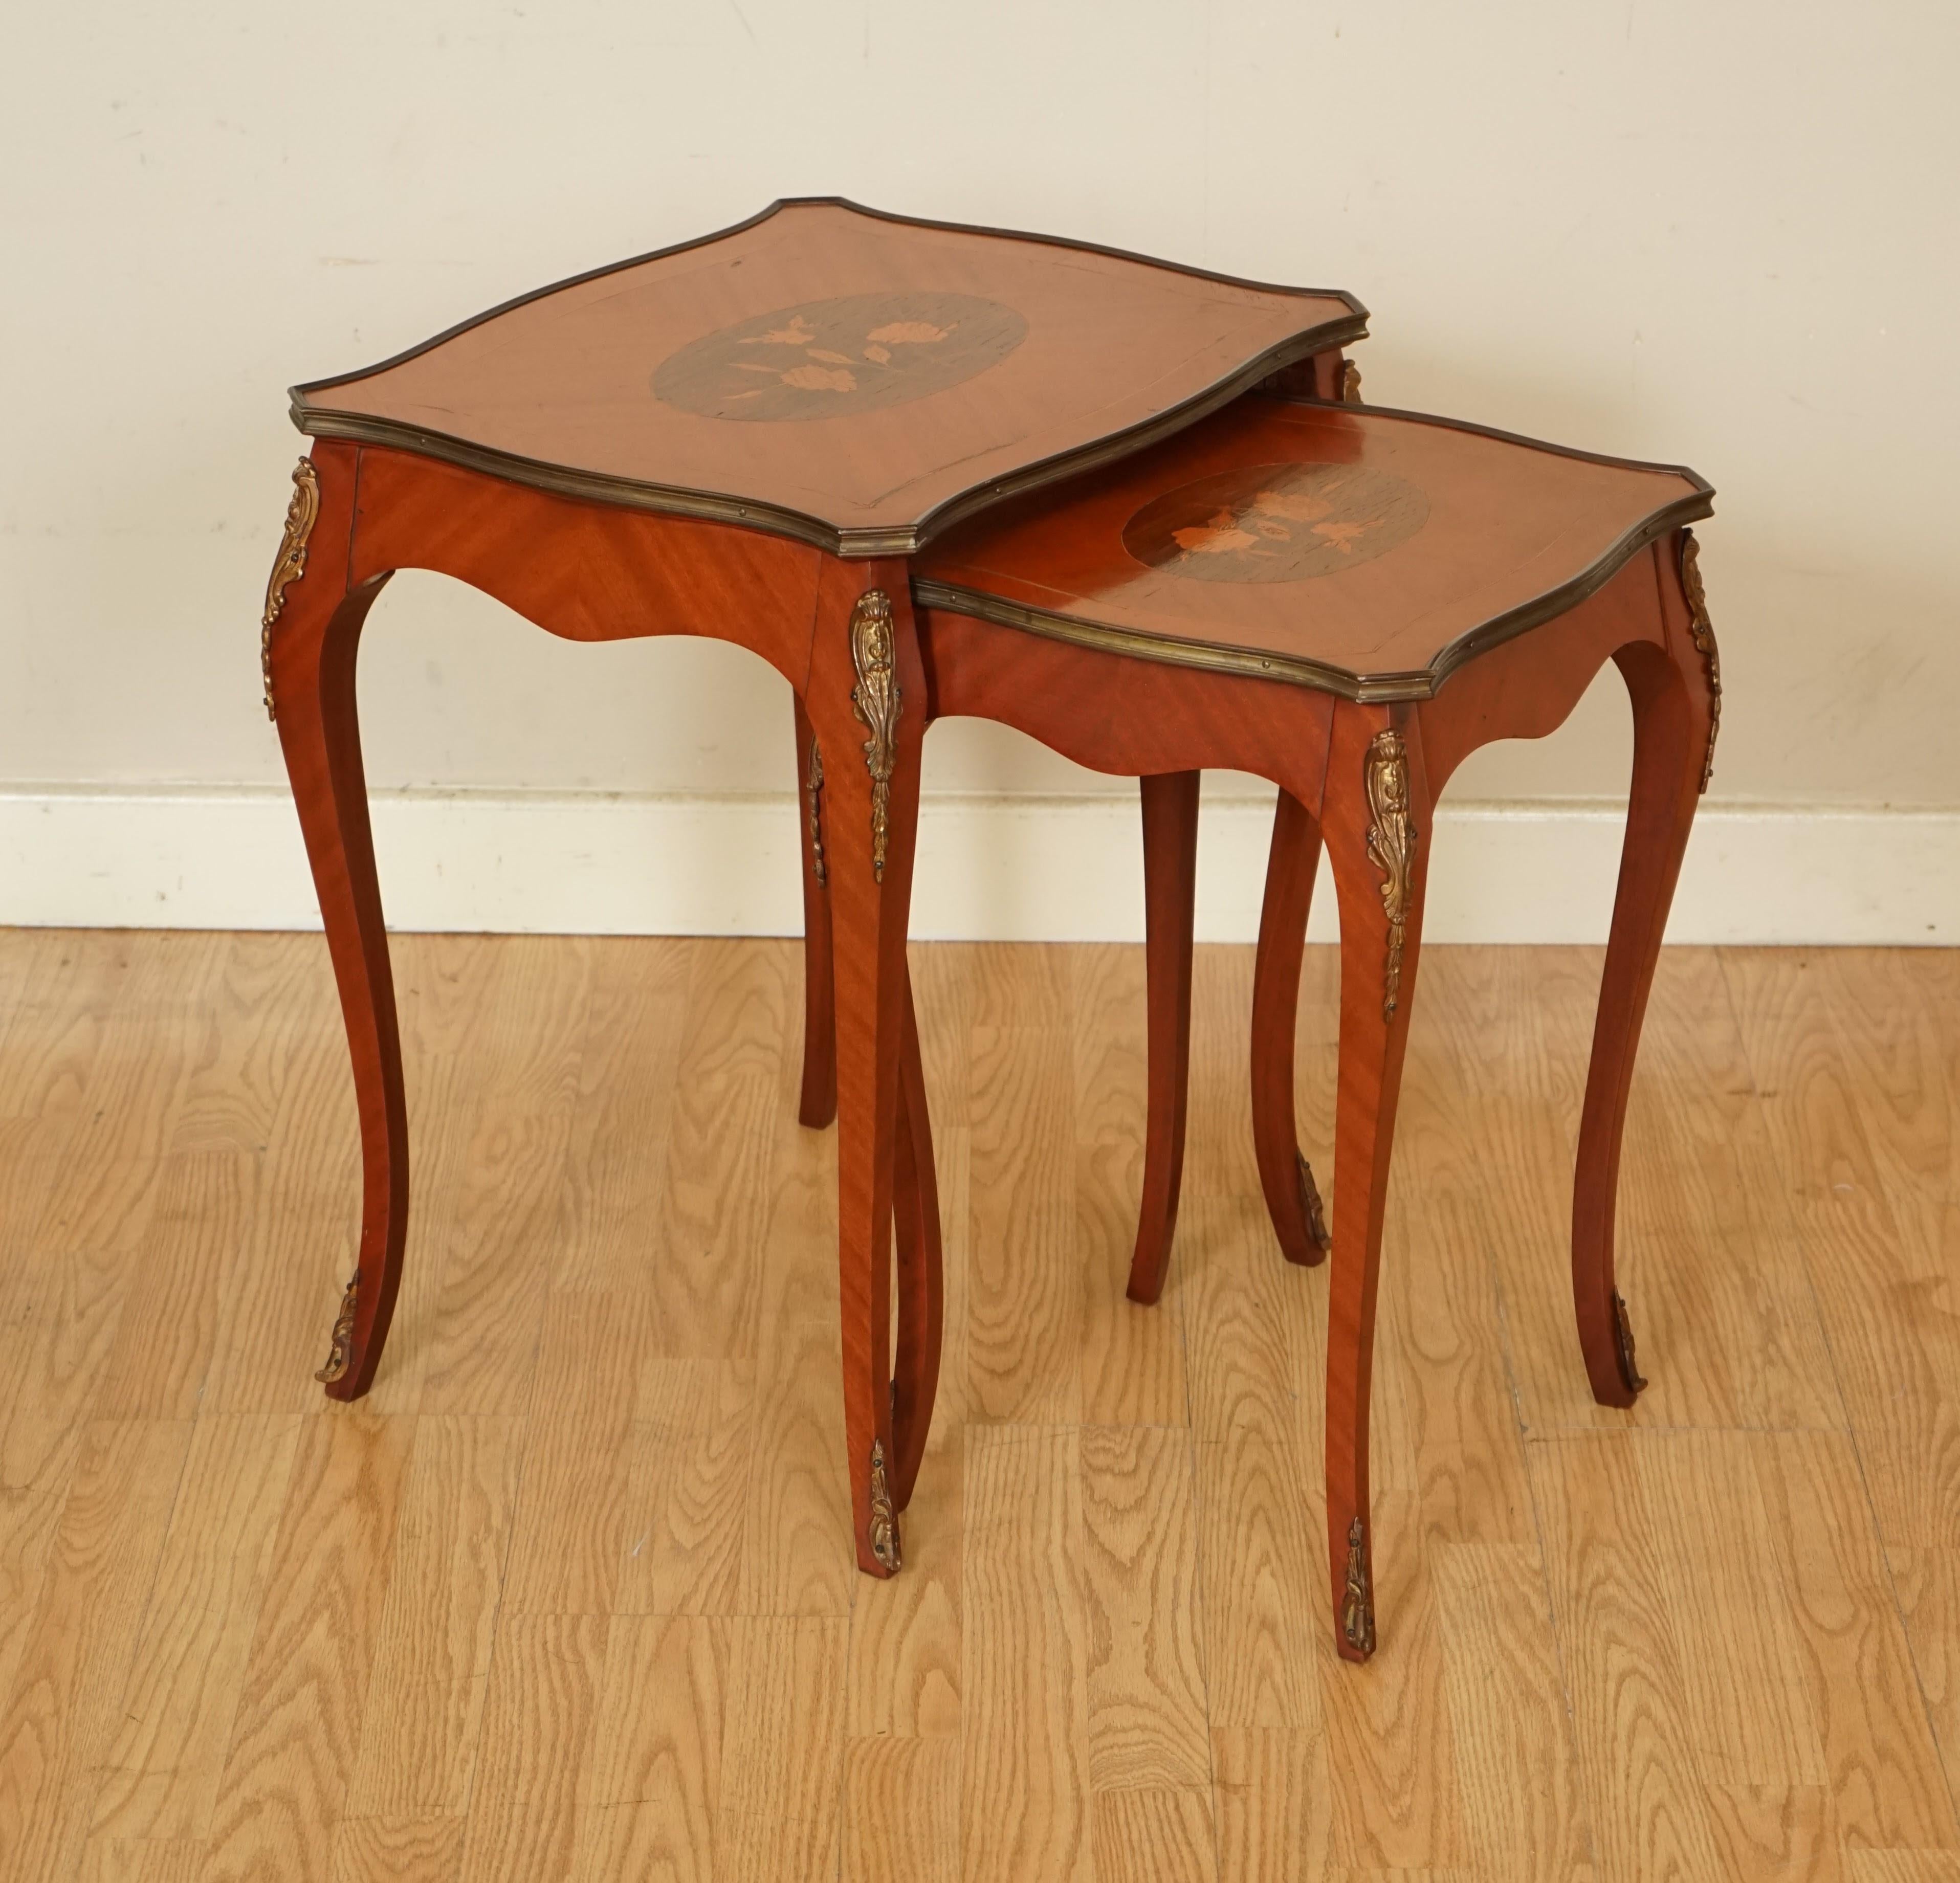 We are so excited to present to you this Vintage French Parquetry Nest of 2 Tables.

A lovely and elegant French Louis XV style parquetry nest of tables. 

This has been deep cleaned, waxed and hand polished. 

Please carefully look at the